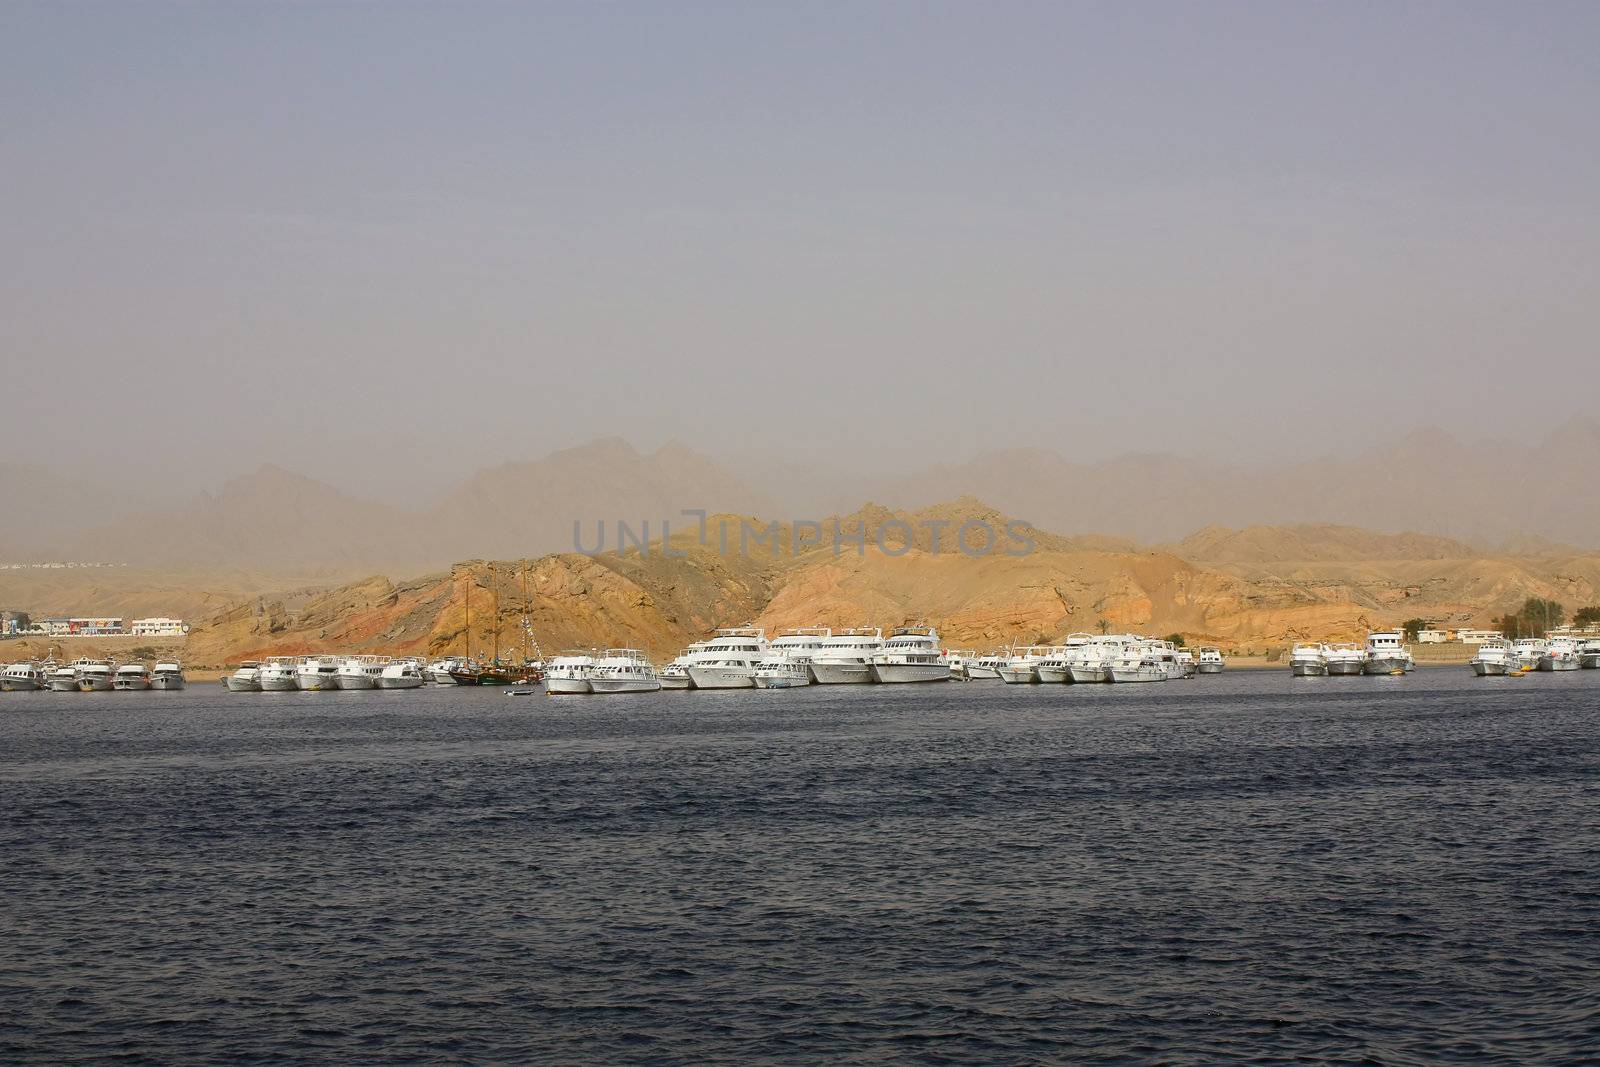 A beautiful landscape of Egypt - the ships at the port on the background of mountains.